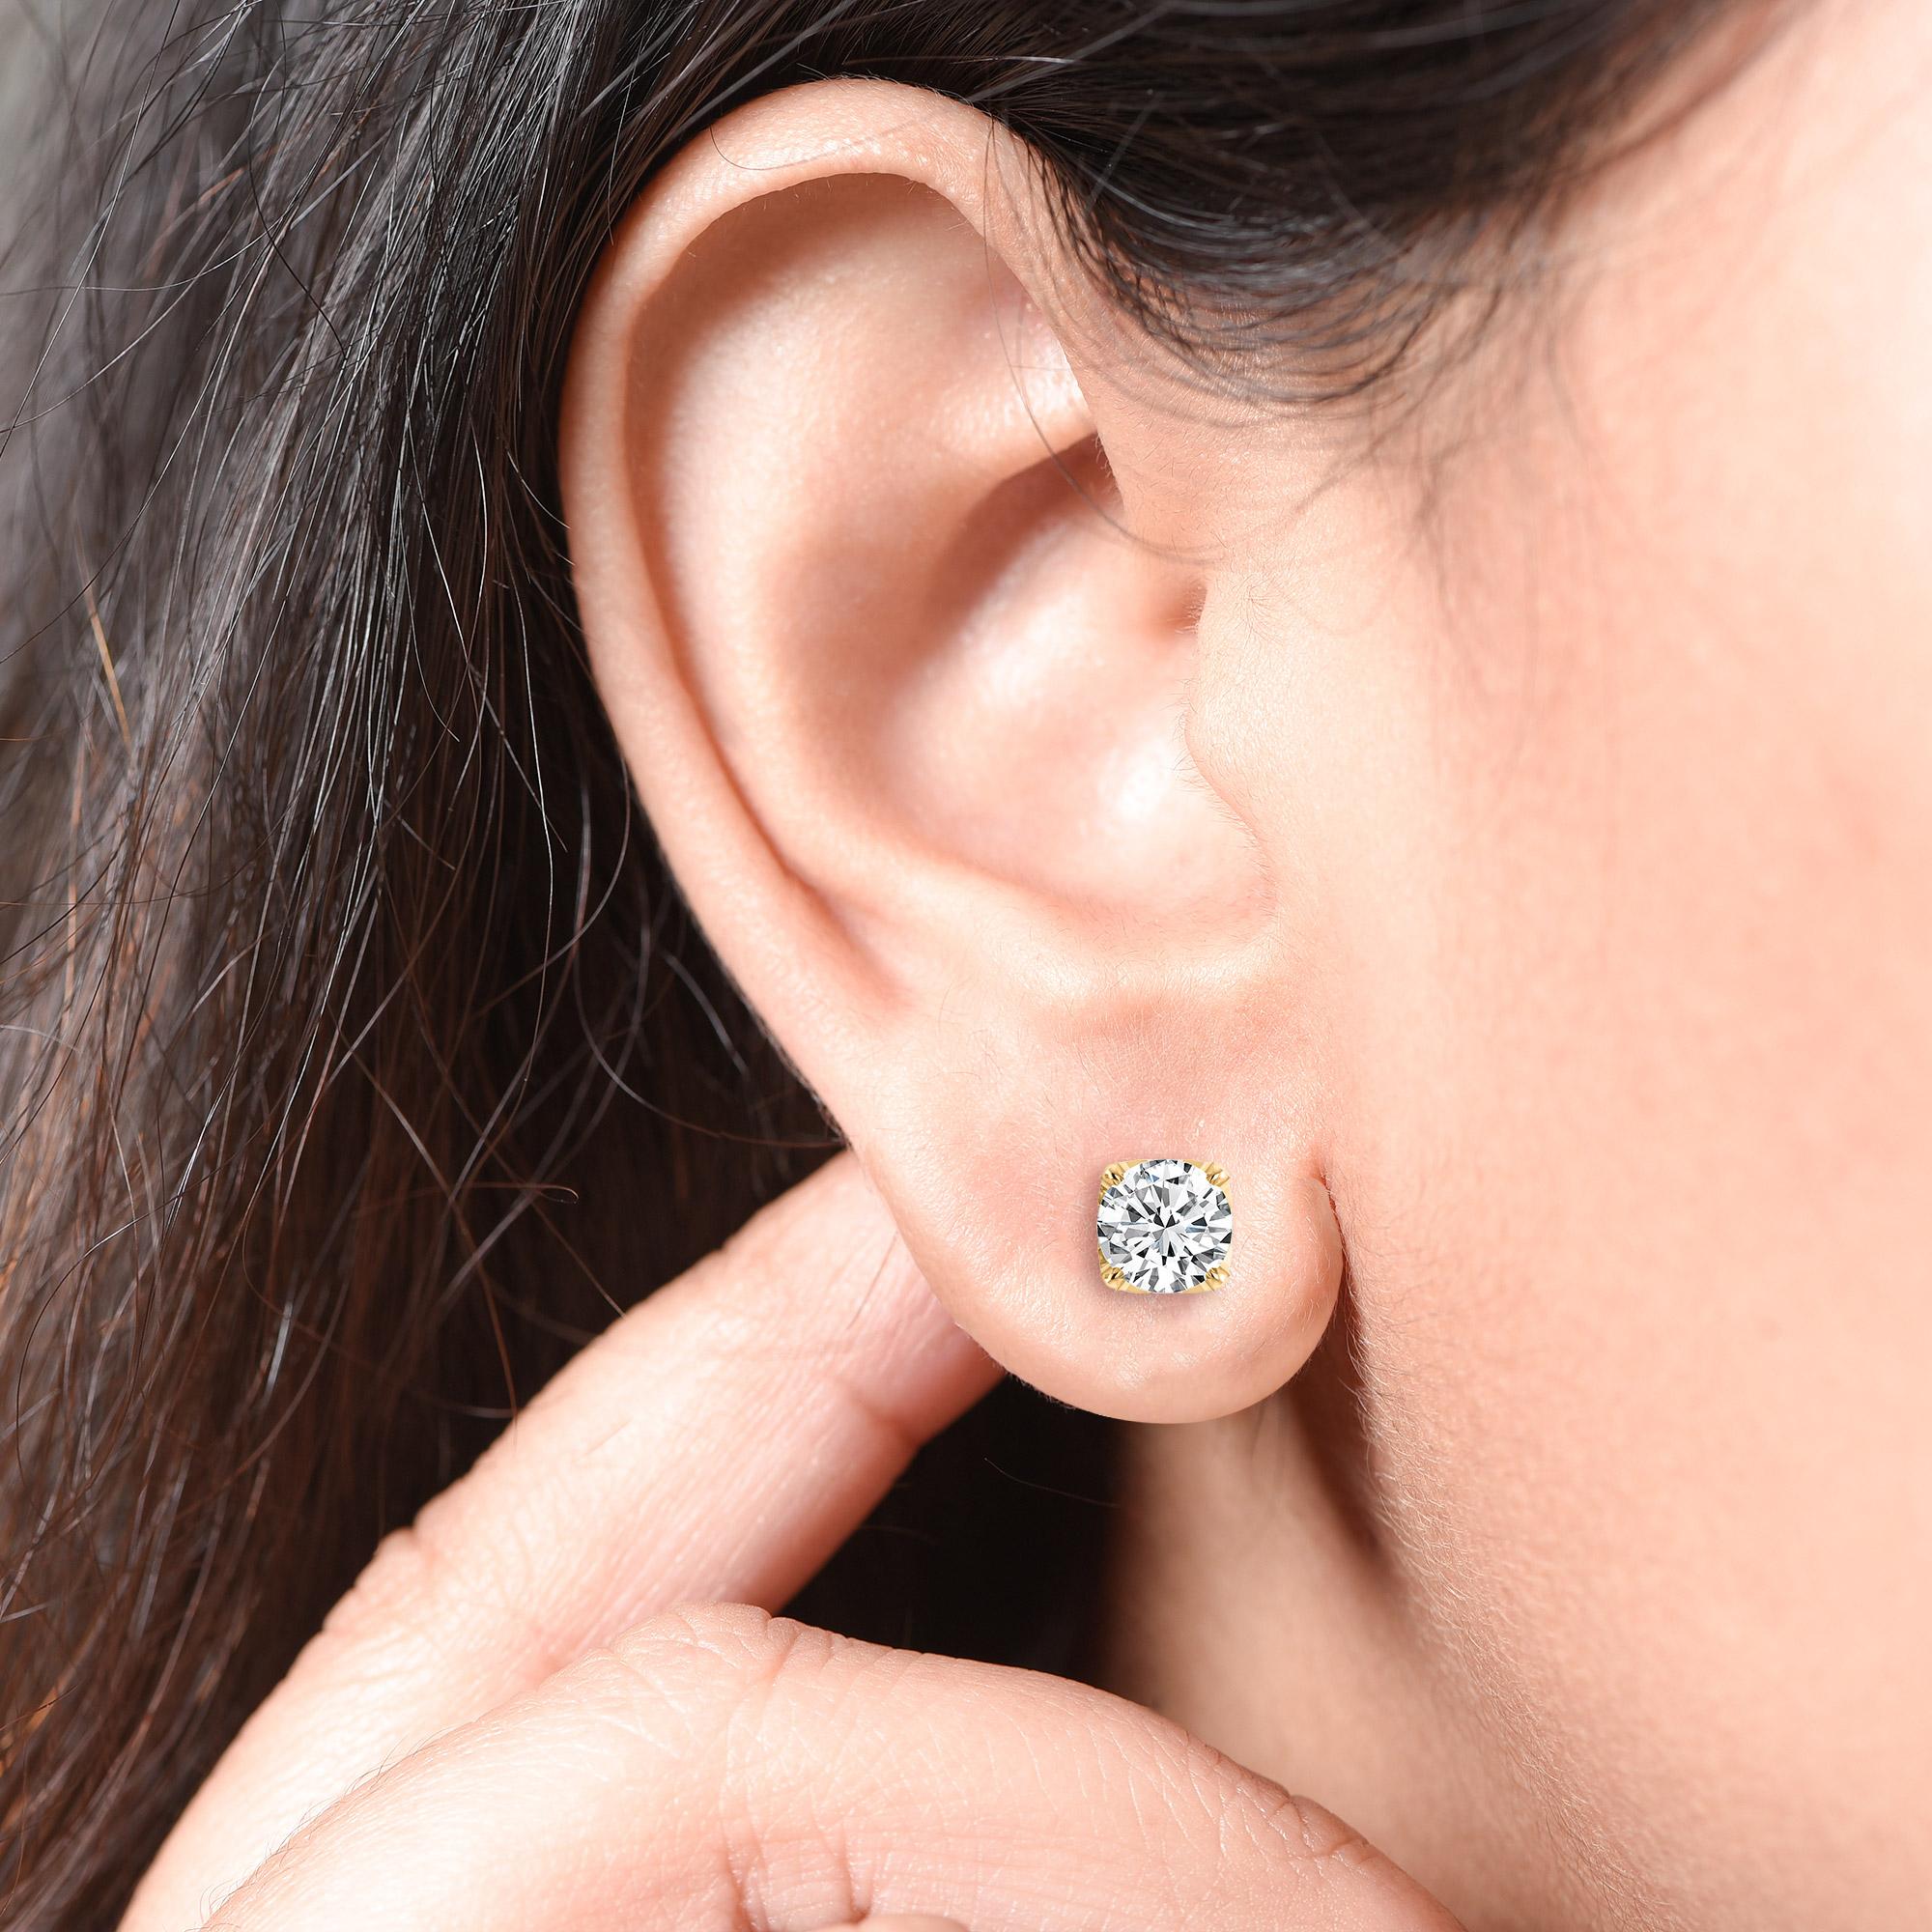 These GIA certified classic diamond studs showcase a pair of perfectly matched diamonds weighing total 1.00 carat. Crafted in 18-karat yellow gold, these four prong earrings are available in rose and white gold as well.

Perfect for gifting and for